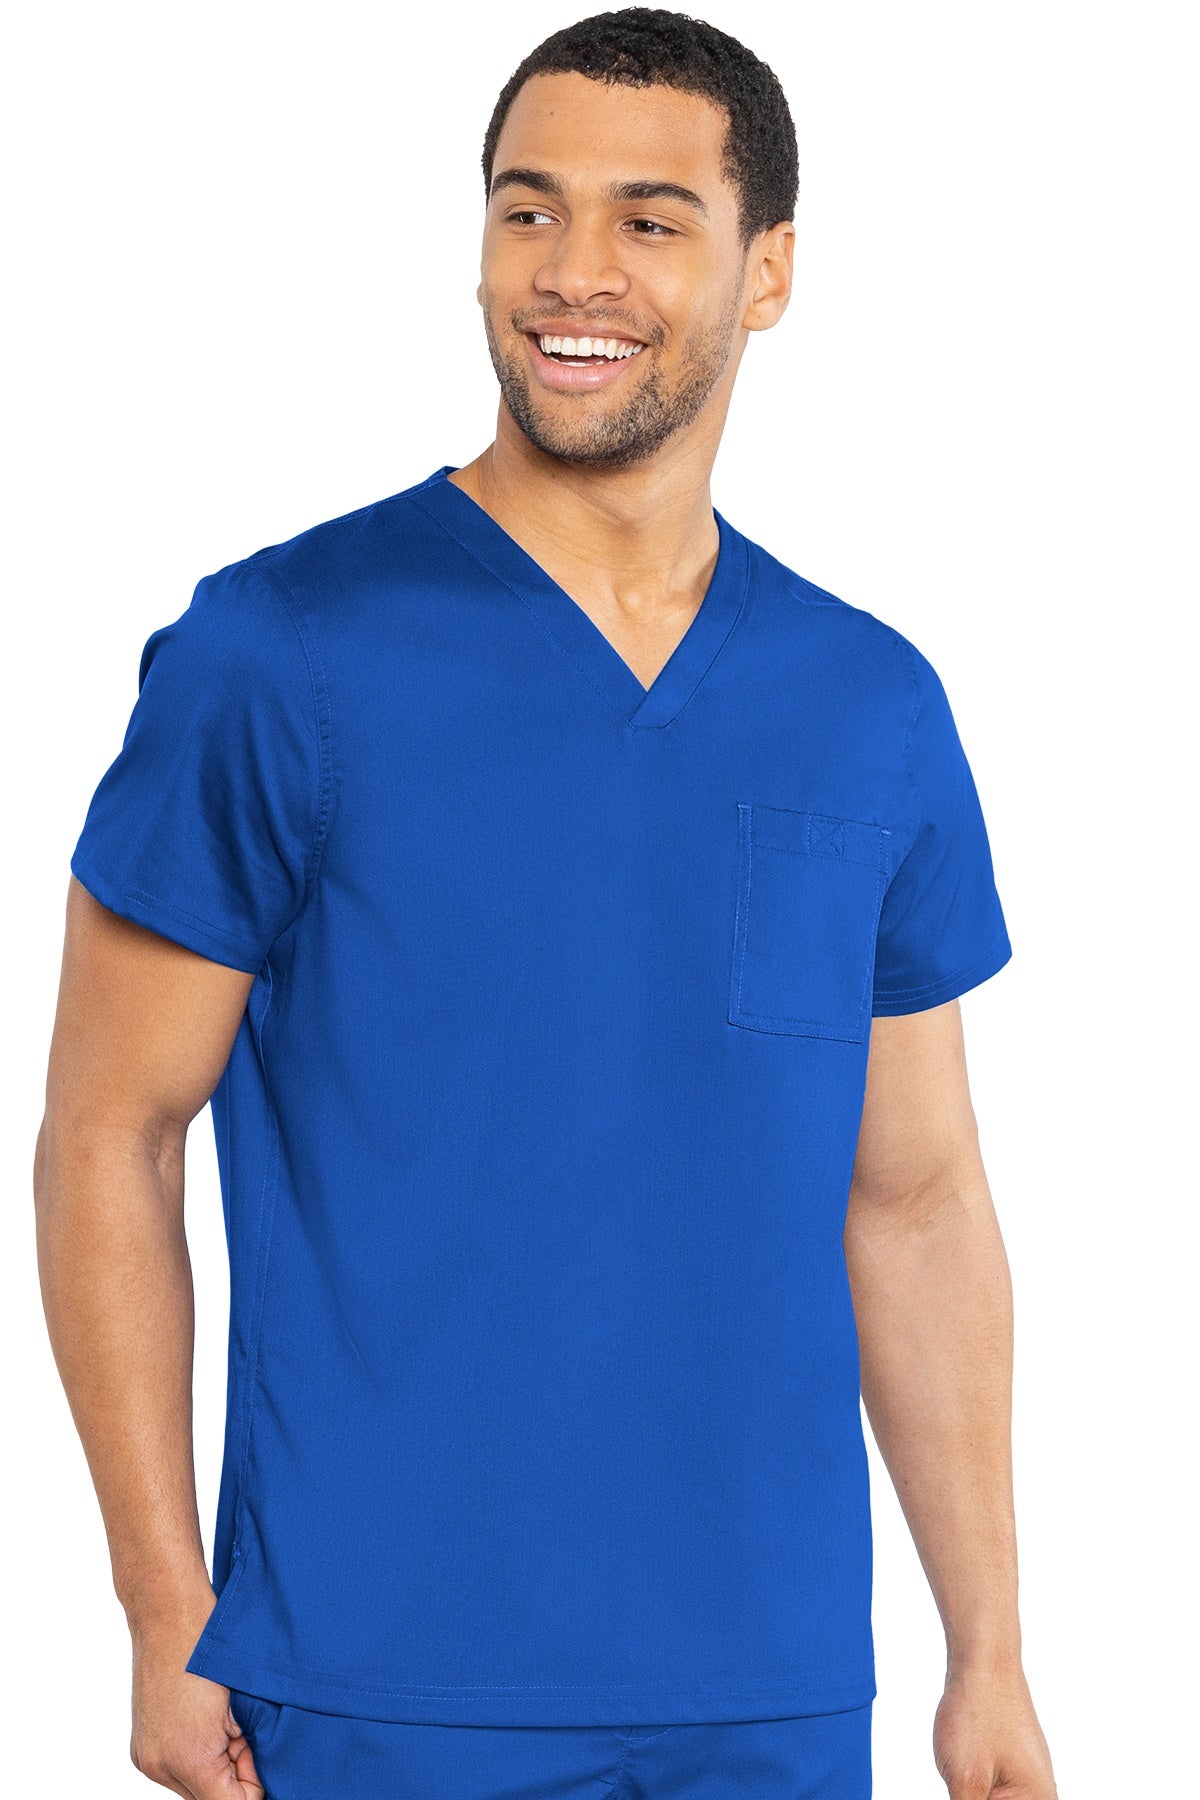 Med Couture Mens Scrub Top RothWear Cadence in Royal at Parker's Clothing and Shoes.